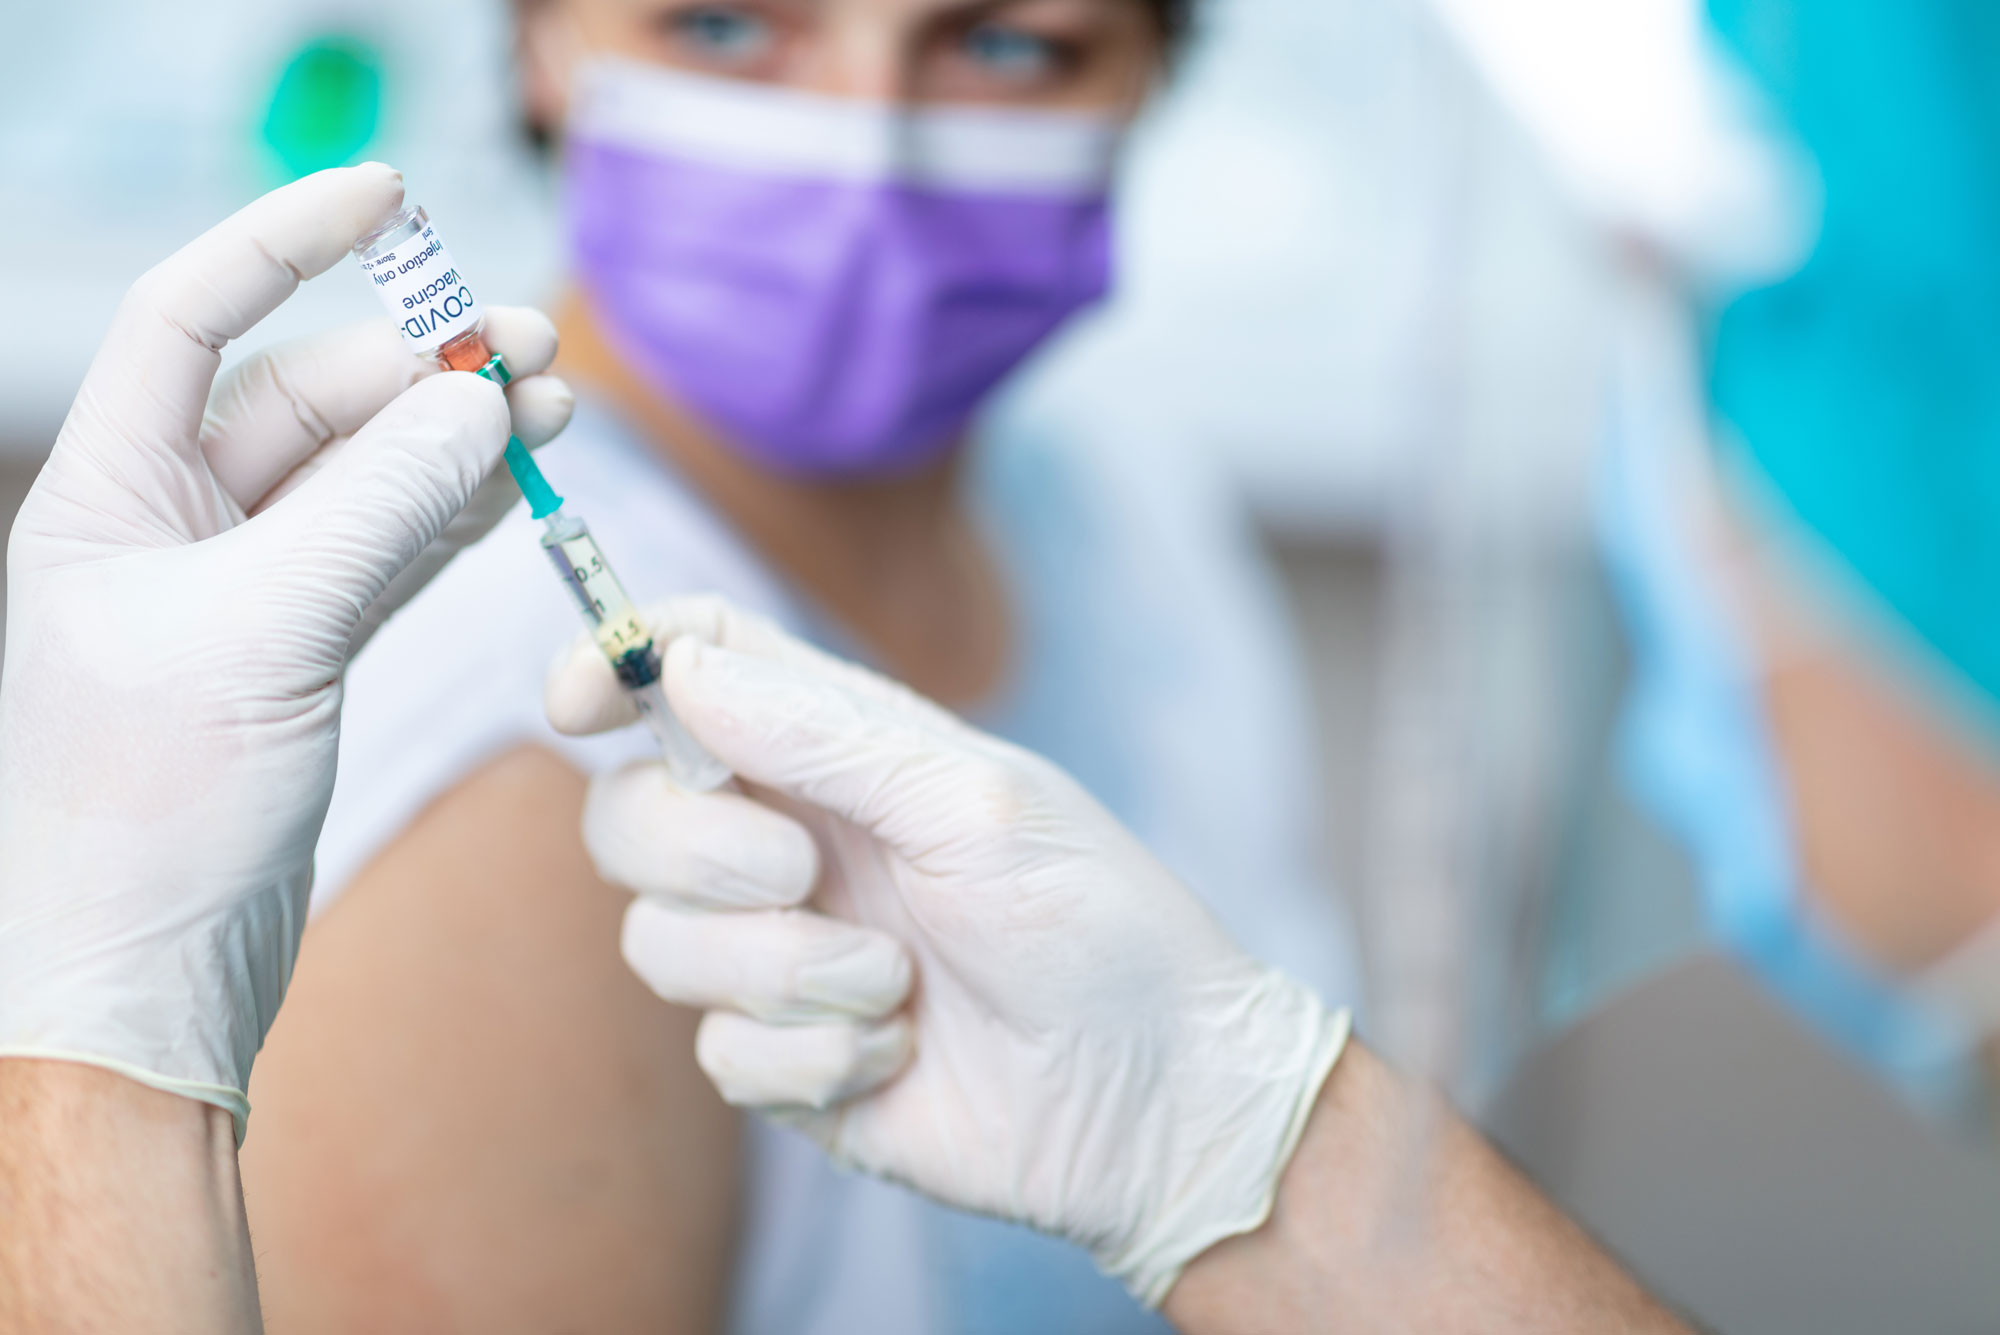 A photo of someone with gloved hands holding a vial that reads "COVID-19 Vaccine" and a needle. A patient is in the background wearing a mask and holding their sleeve up in preparation of receiving the vaccine.